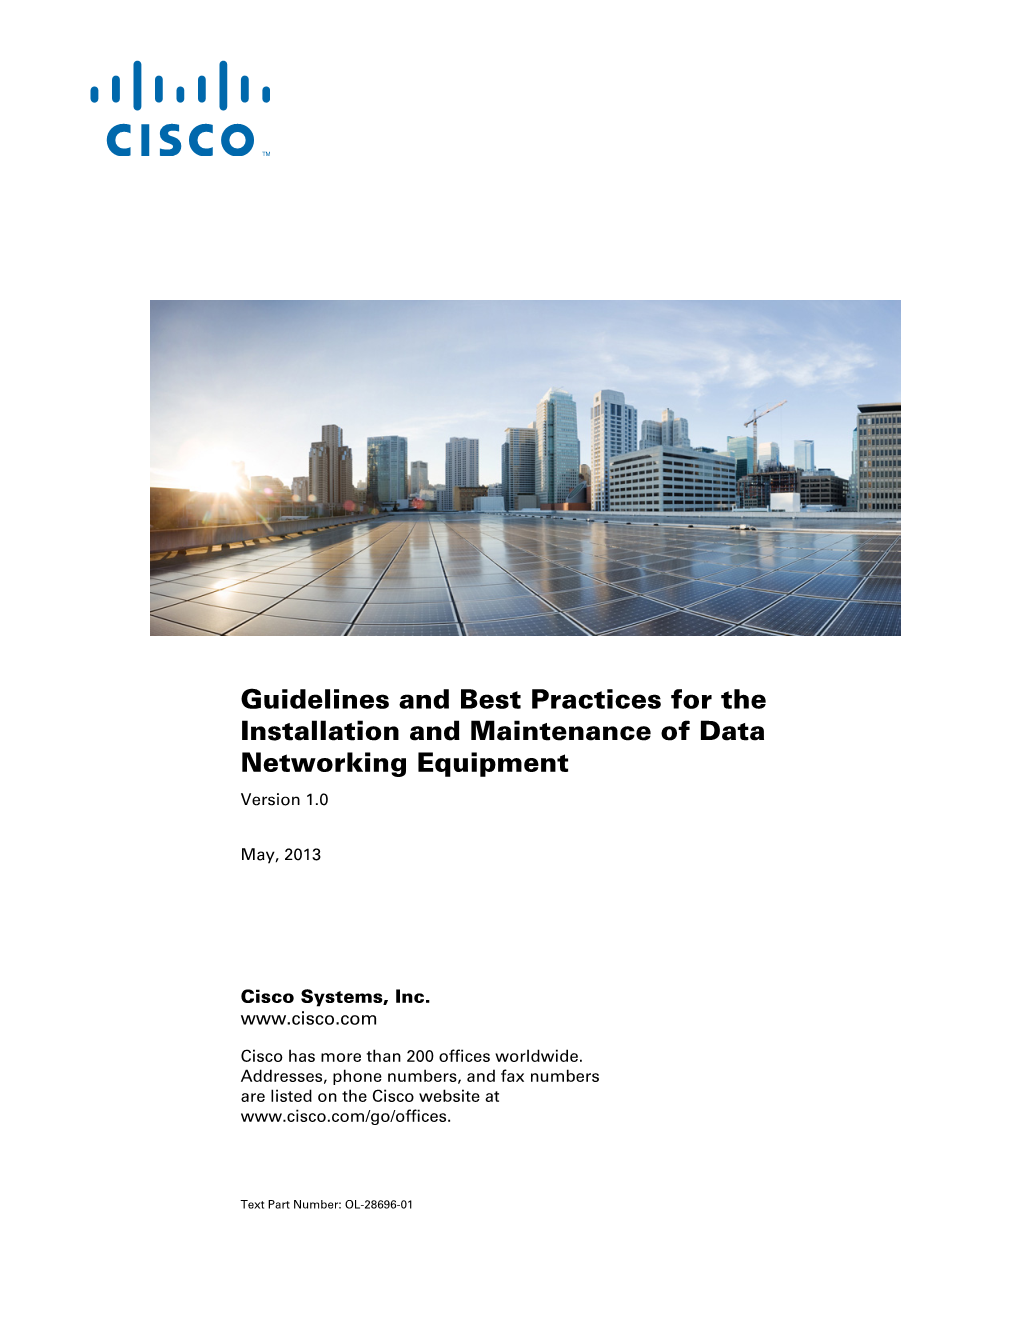 Guidelines and Best Practices for the Installation and Maintenance of Data Networking Equipment Version 1.0